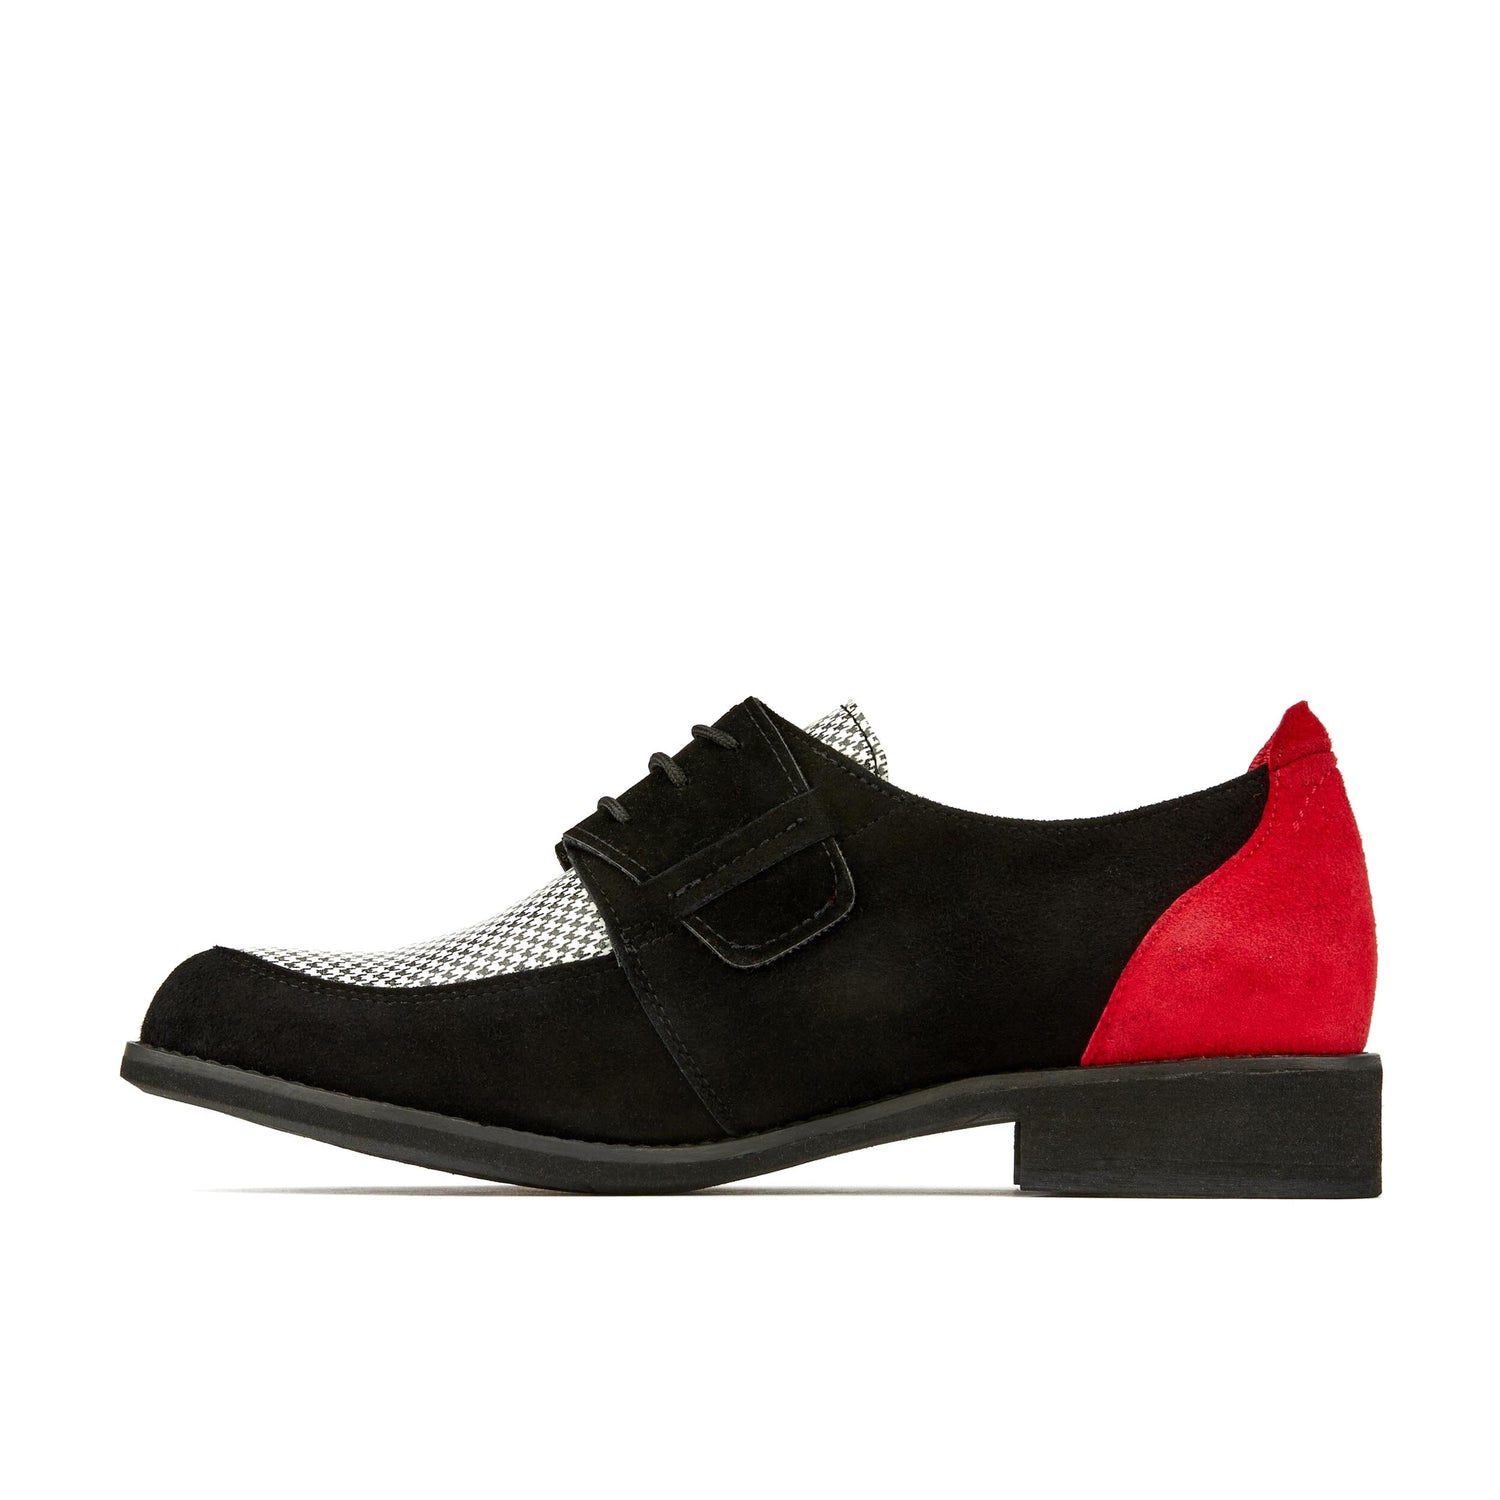 Madness - Black & Red & Grey Womens Shoes Embassy London 